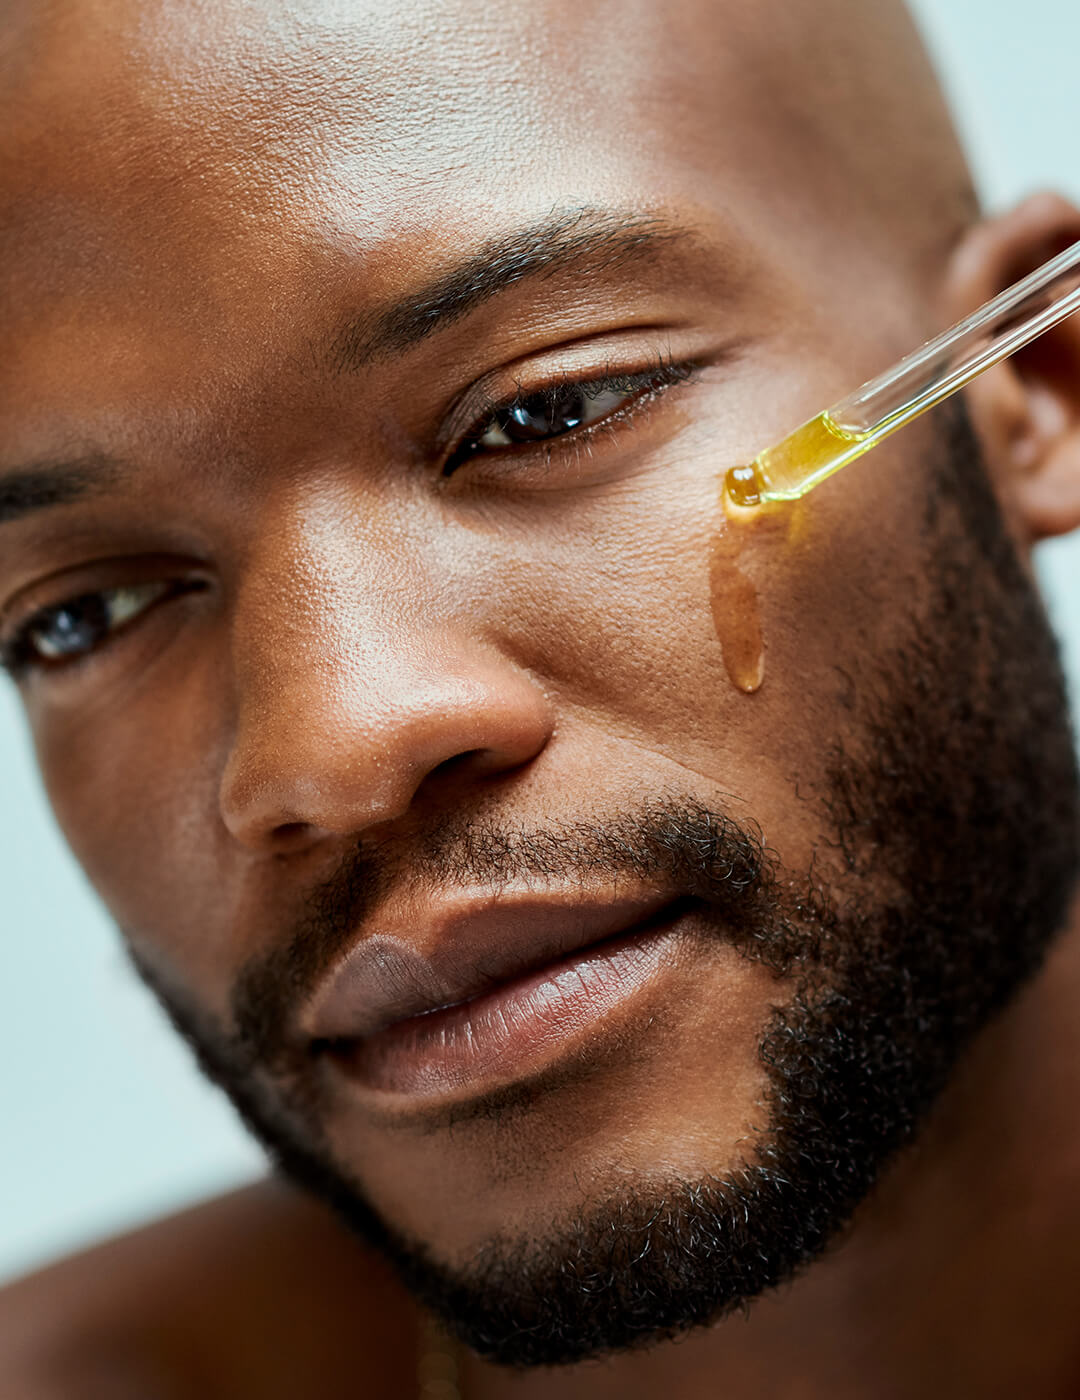 African American applying serum on his face using a dropper. Attractive male model with a beard inside of a room with an isolated studio background. He is wearing a necklace